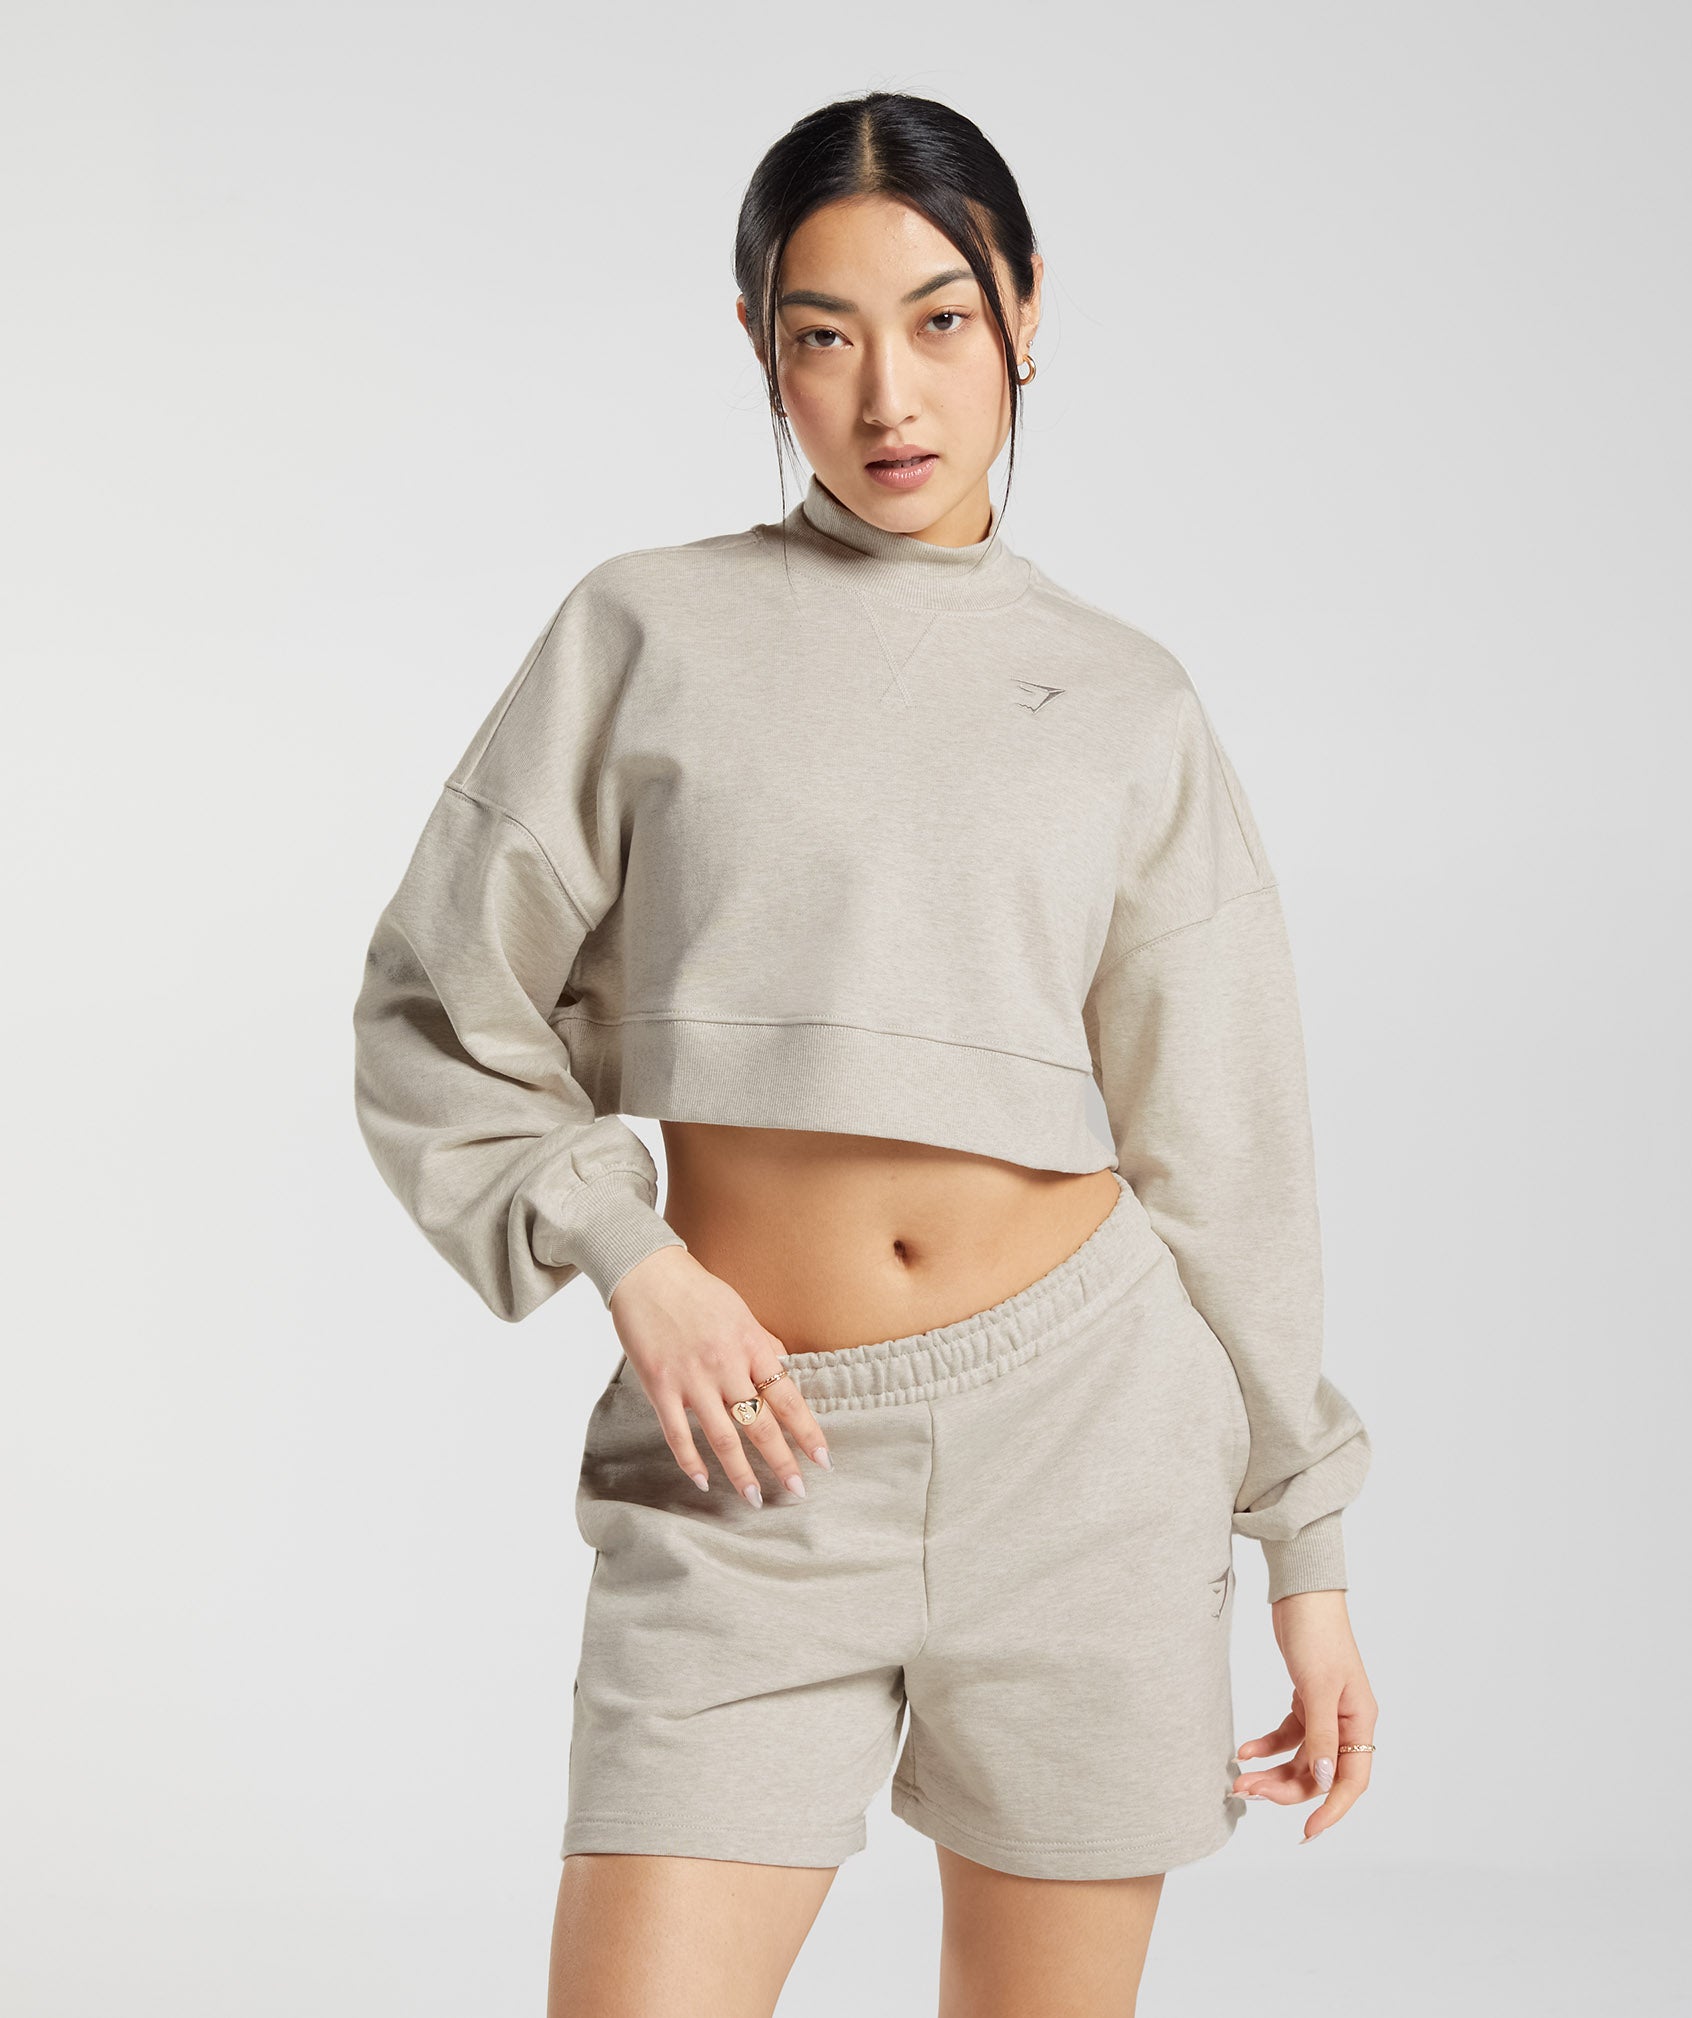 Rest Day Sweats Cropped Pullover in Sand Marl - view 1